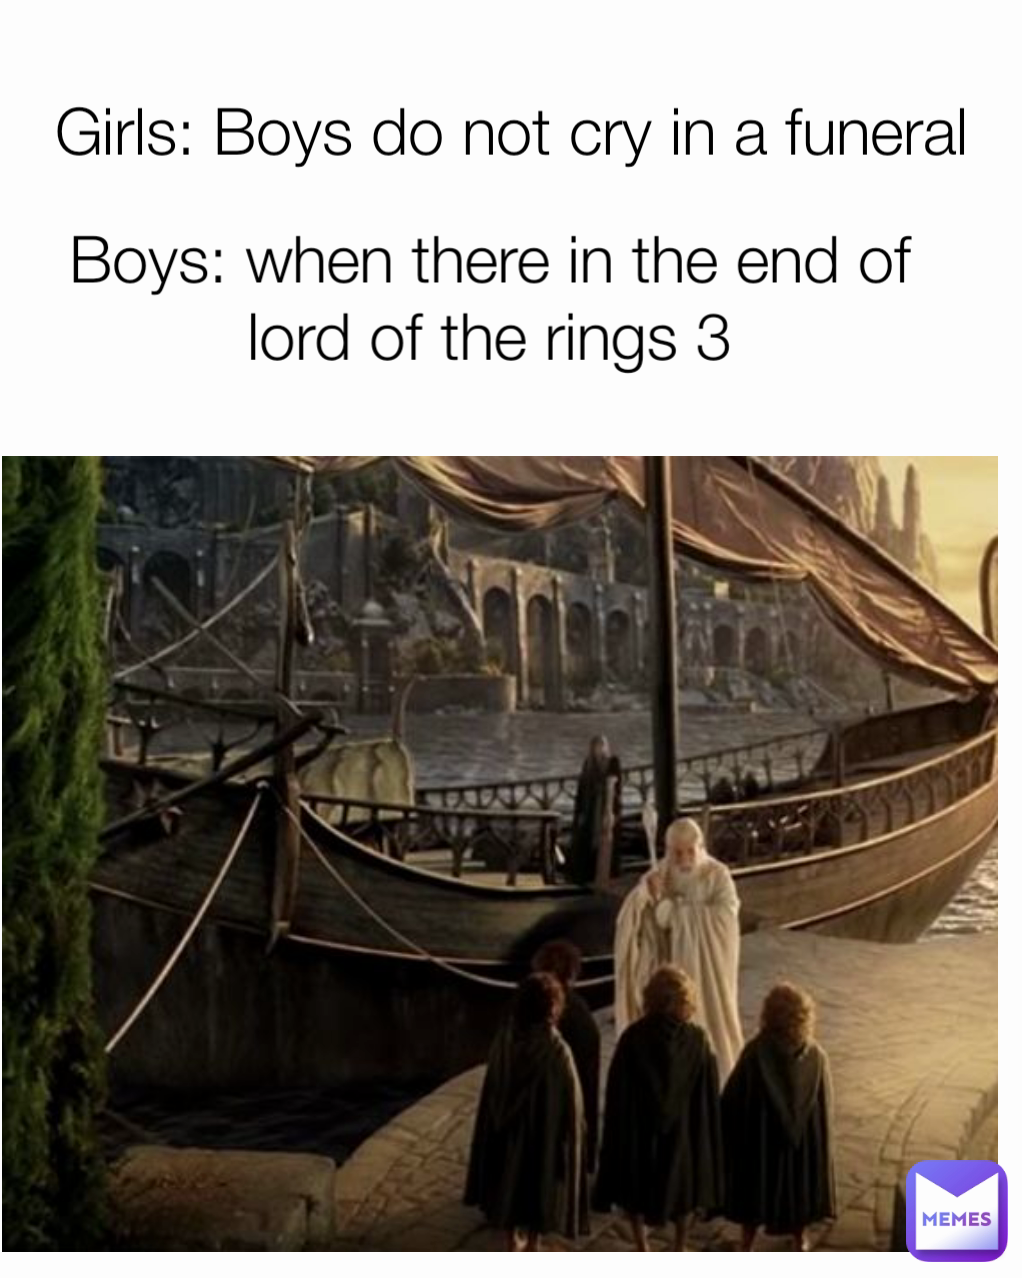 Boys: when there in the end of lord of the rings 3 Girls: Boys do not cry in a funeral